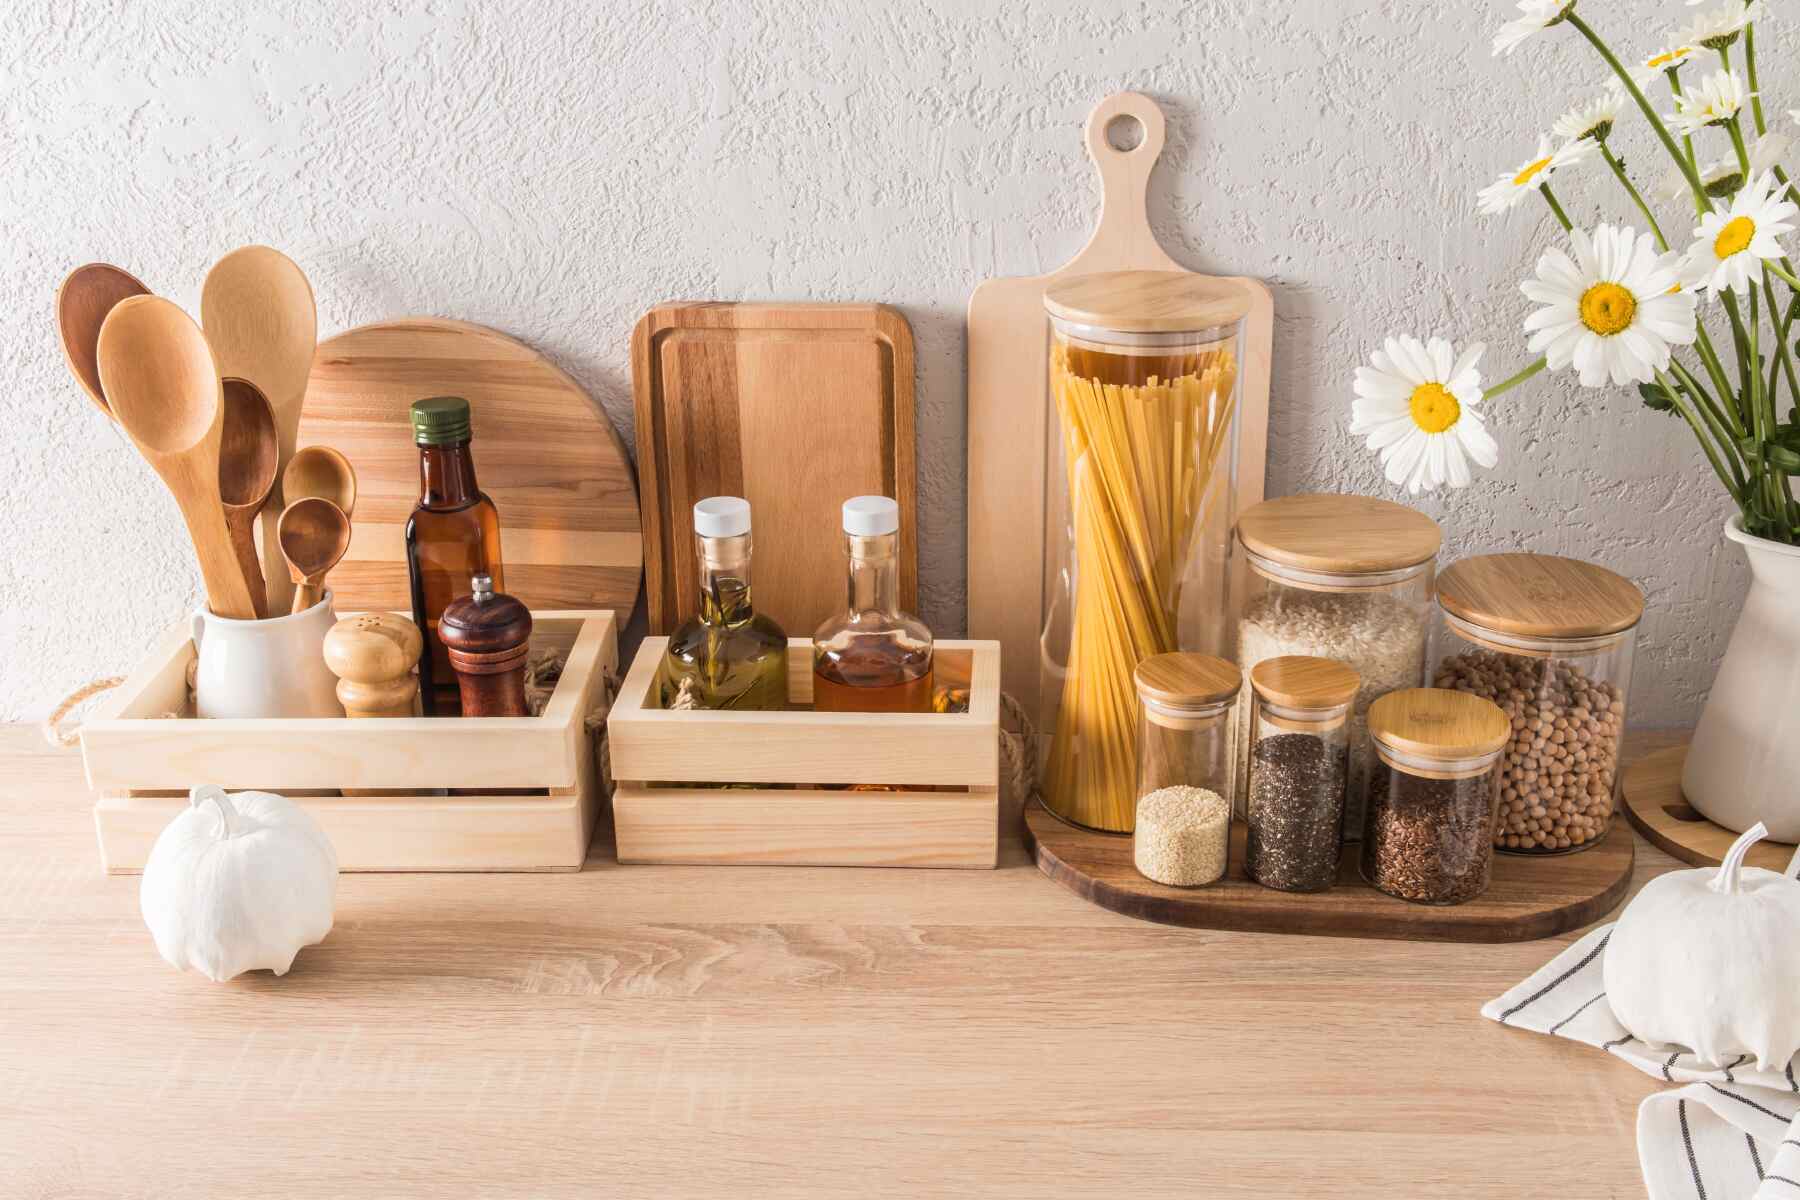 wooden tray on wooden kitchen countertop